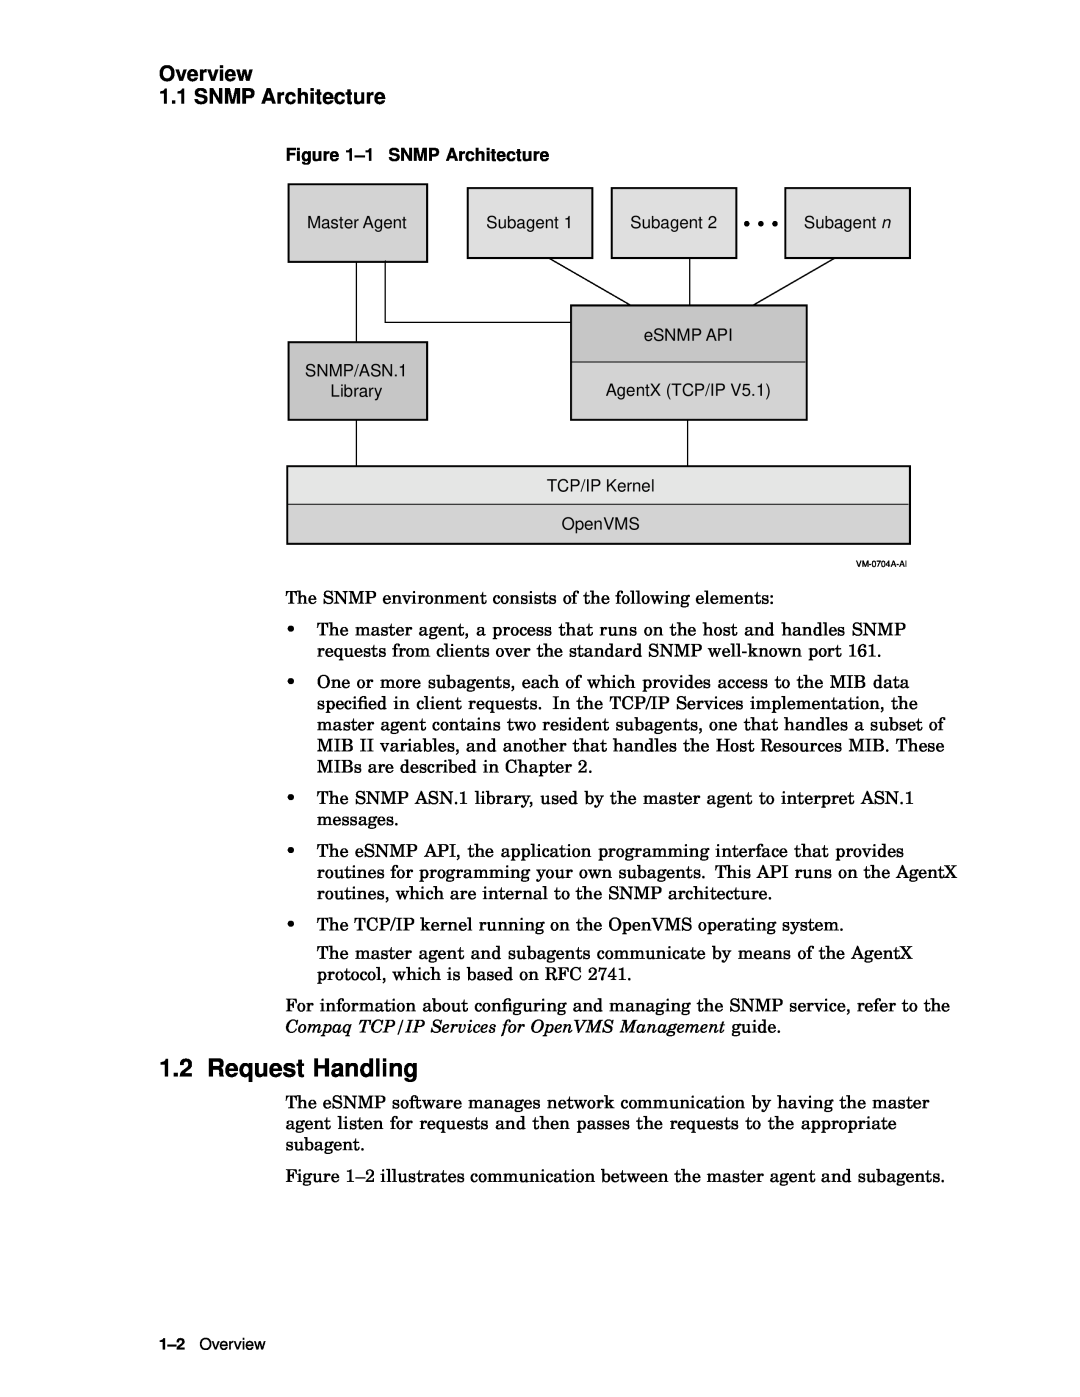 Compaq AAR04BCTE manual Request Handling, Overview 1.1 SNMP Architecture 